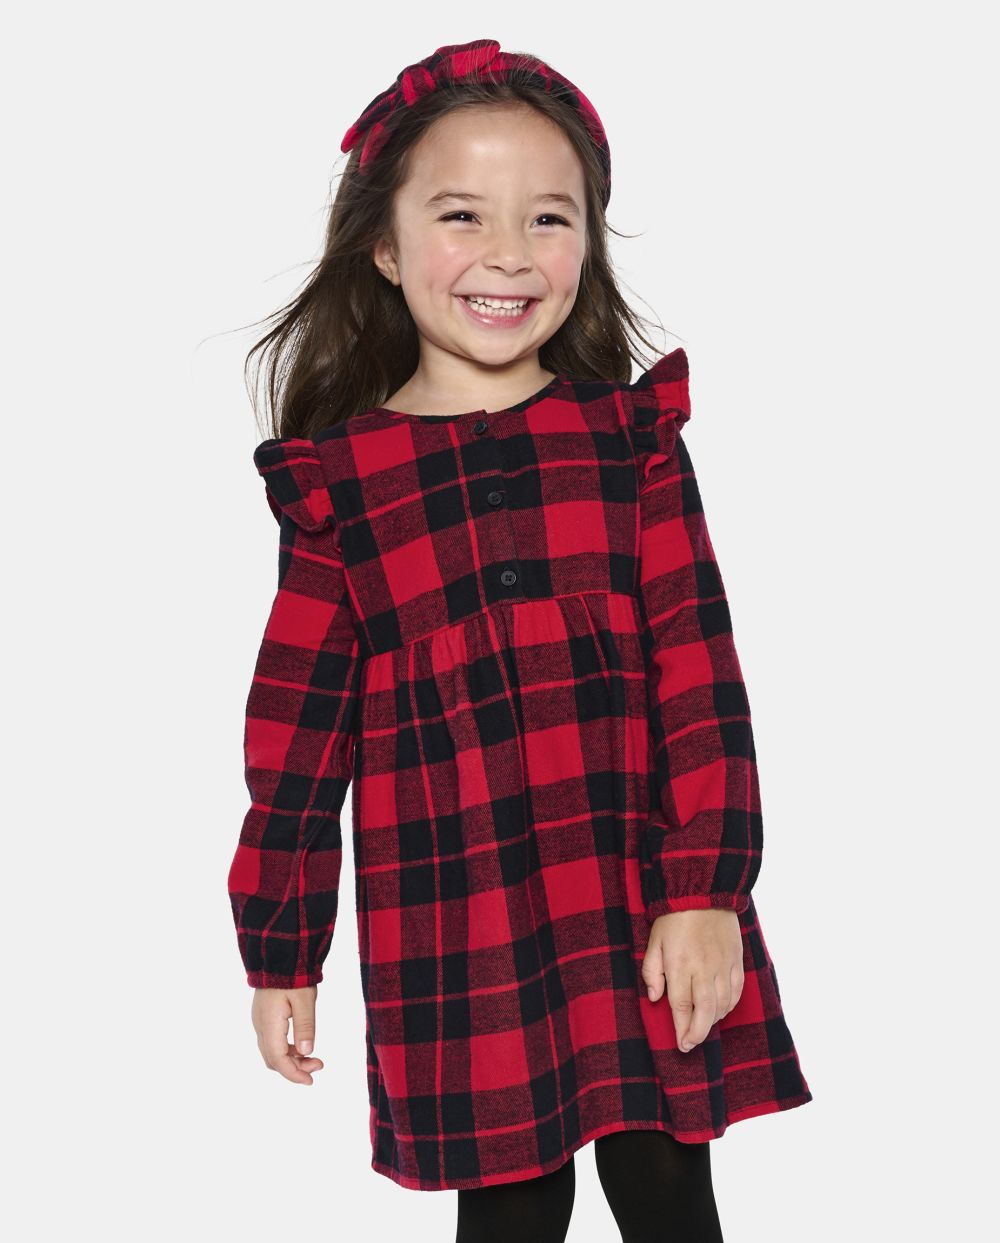 Toddler Baby Above the Knee Flutter Long Sleeves Plaid Print Button Front Crew Neck Shirt Dress